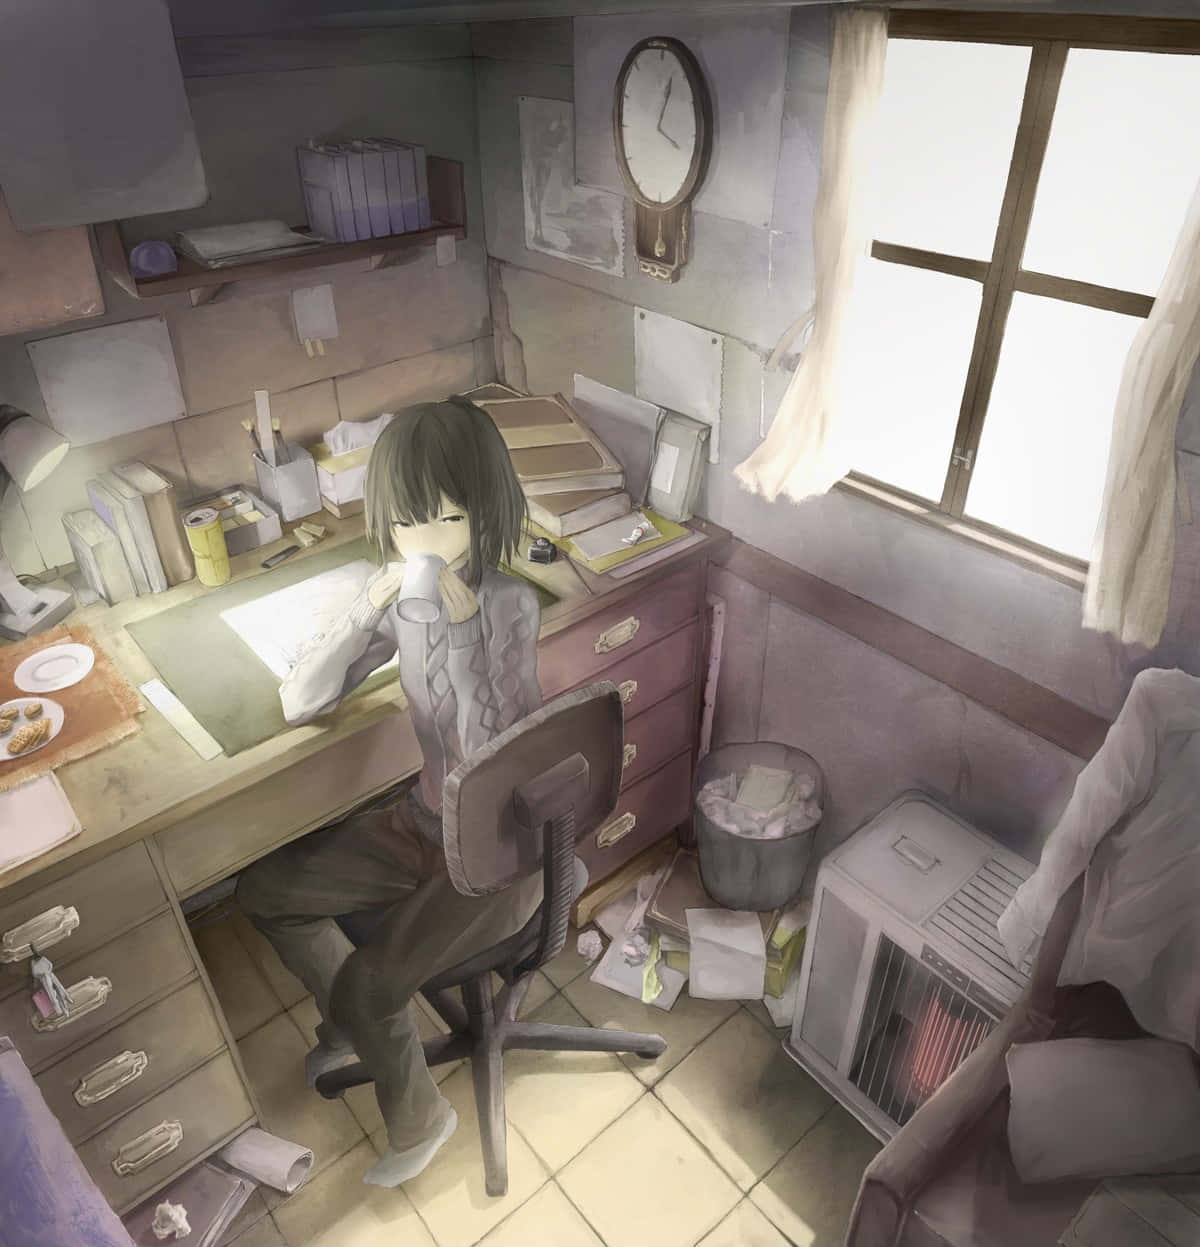 A Girl Sitting At A Desk In An Anime Room